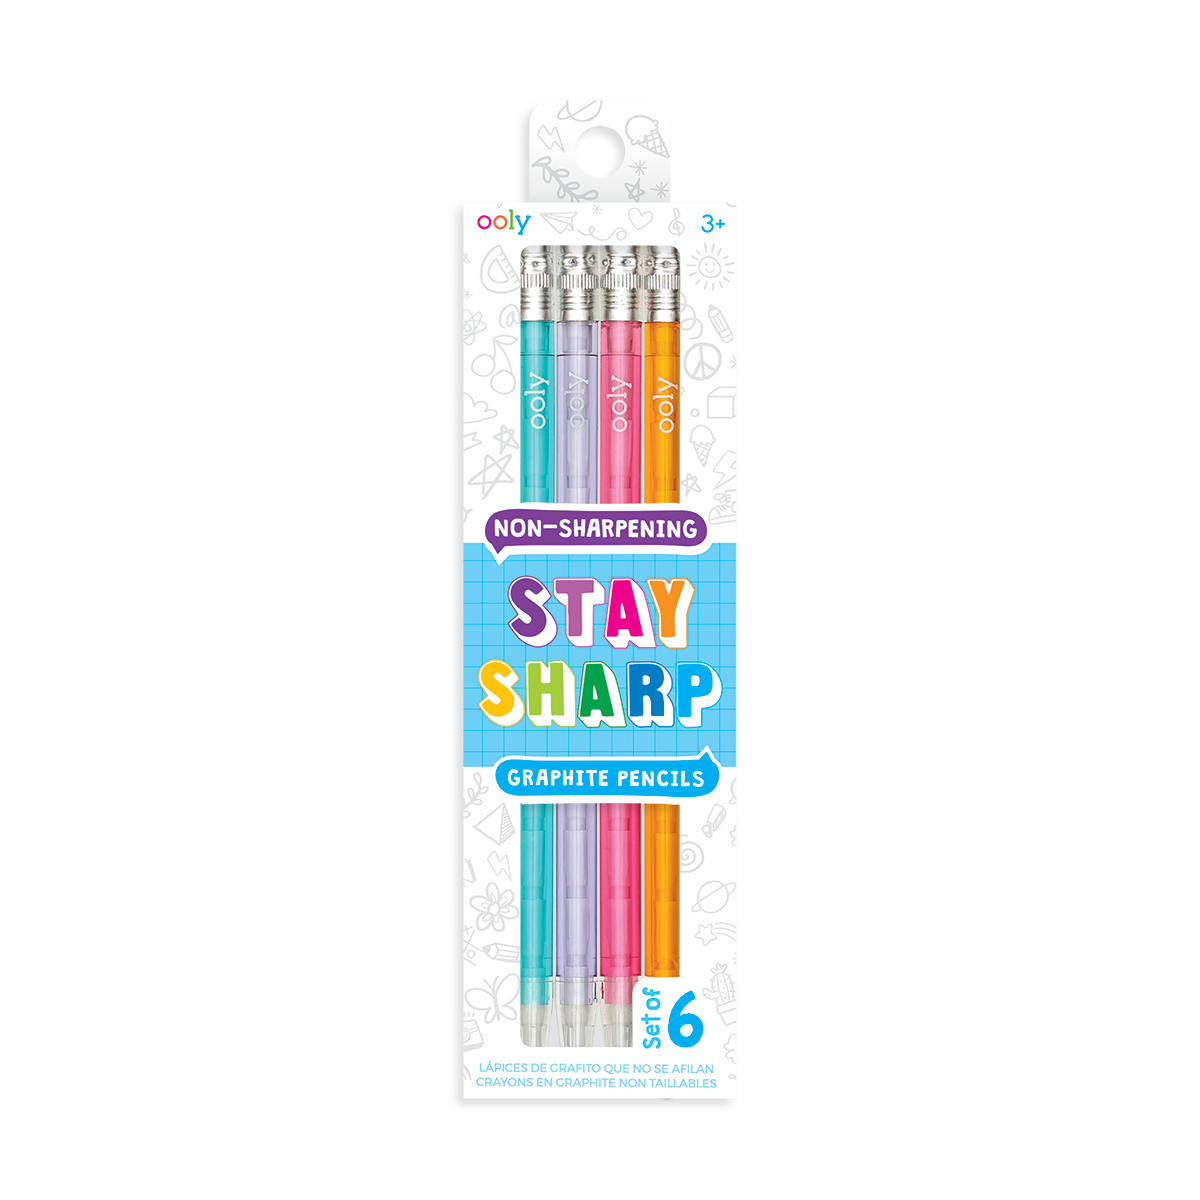 OOLY Stay Sharp Graphite Pencils in new packaging.